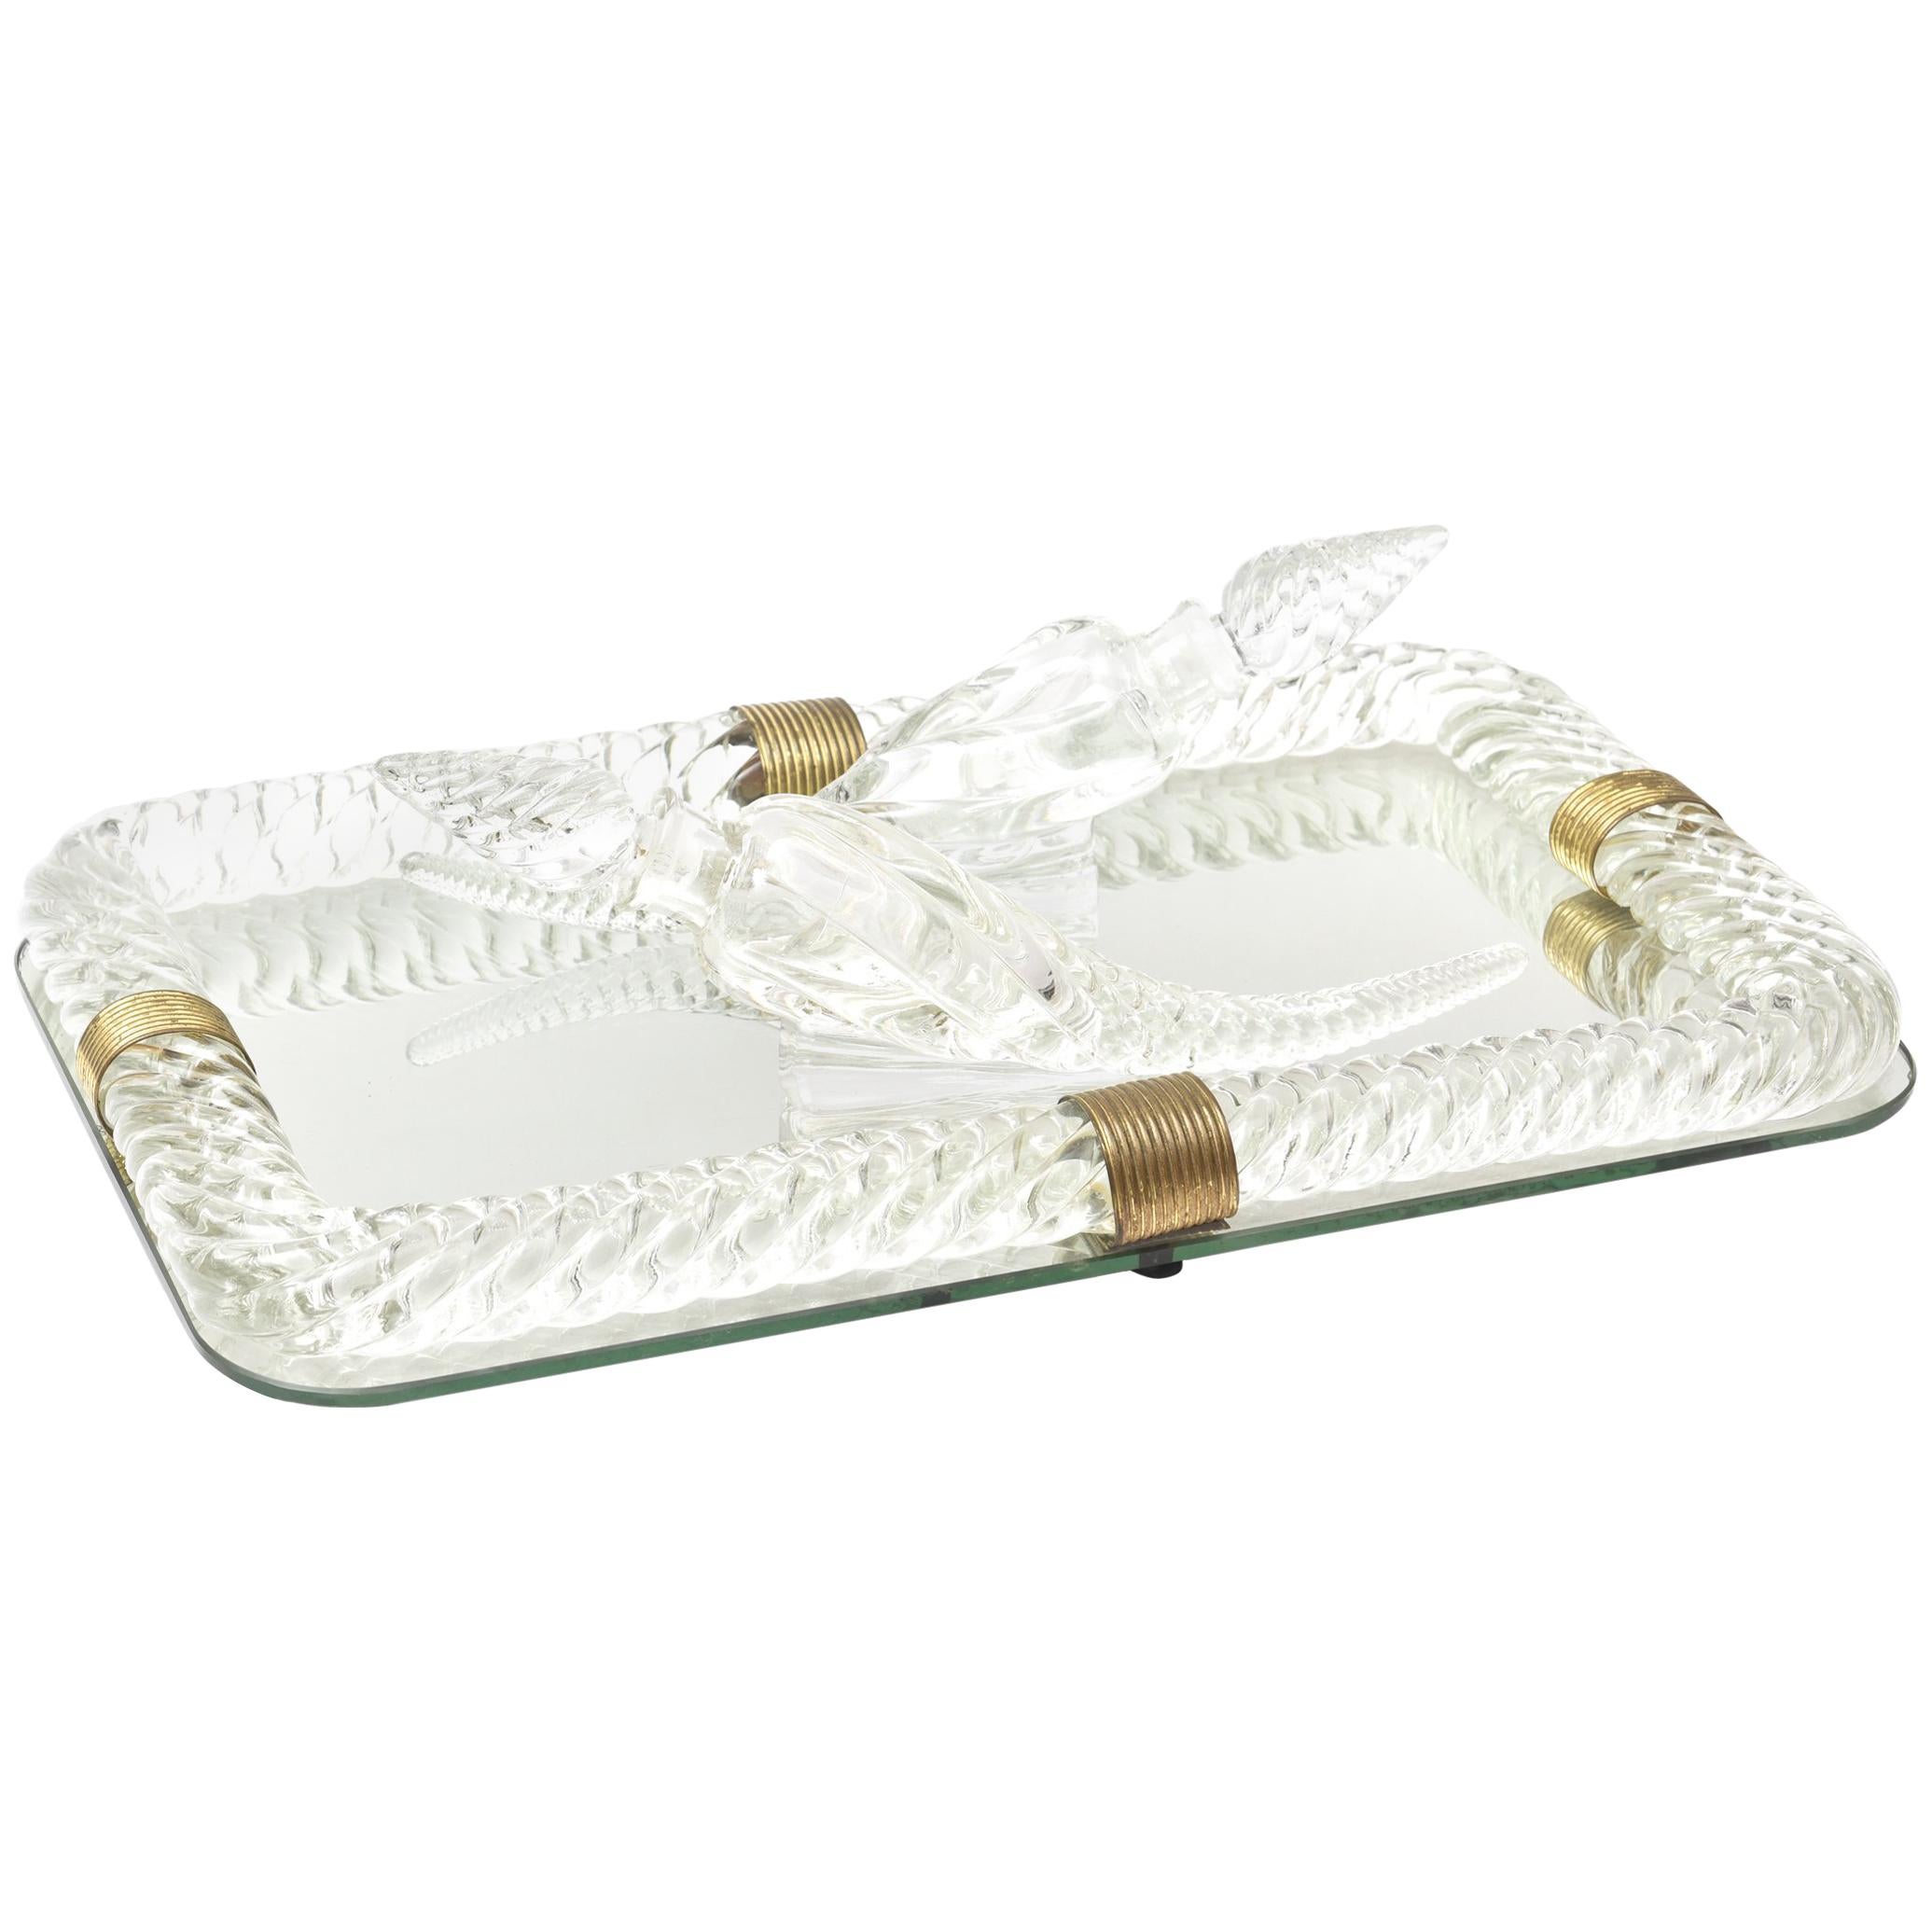 Baccarat Style Glass Mirror Vanity Tray with 2 Perfume Bottles